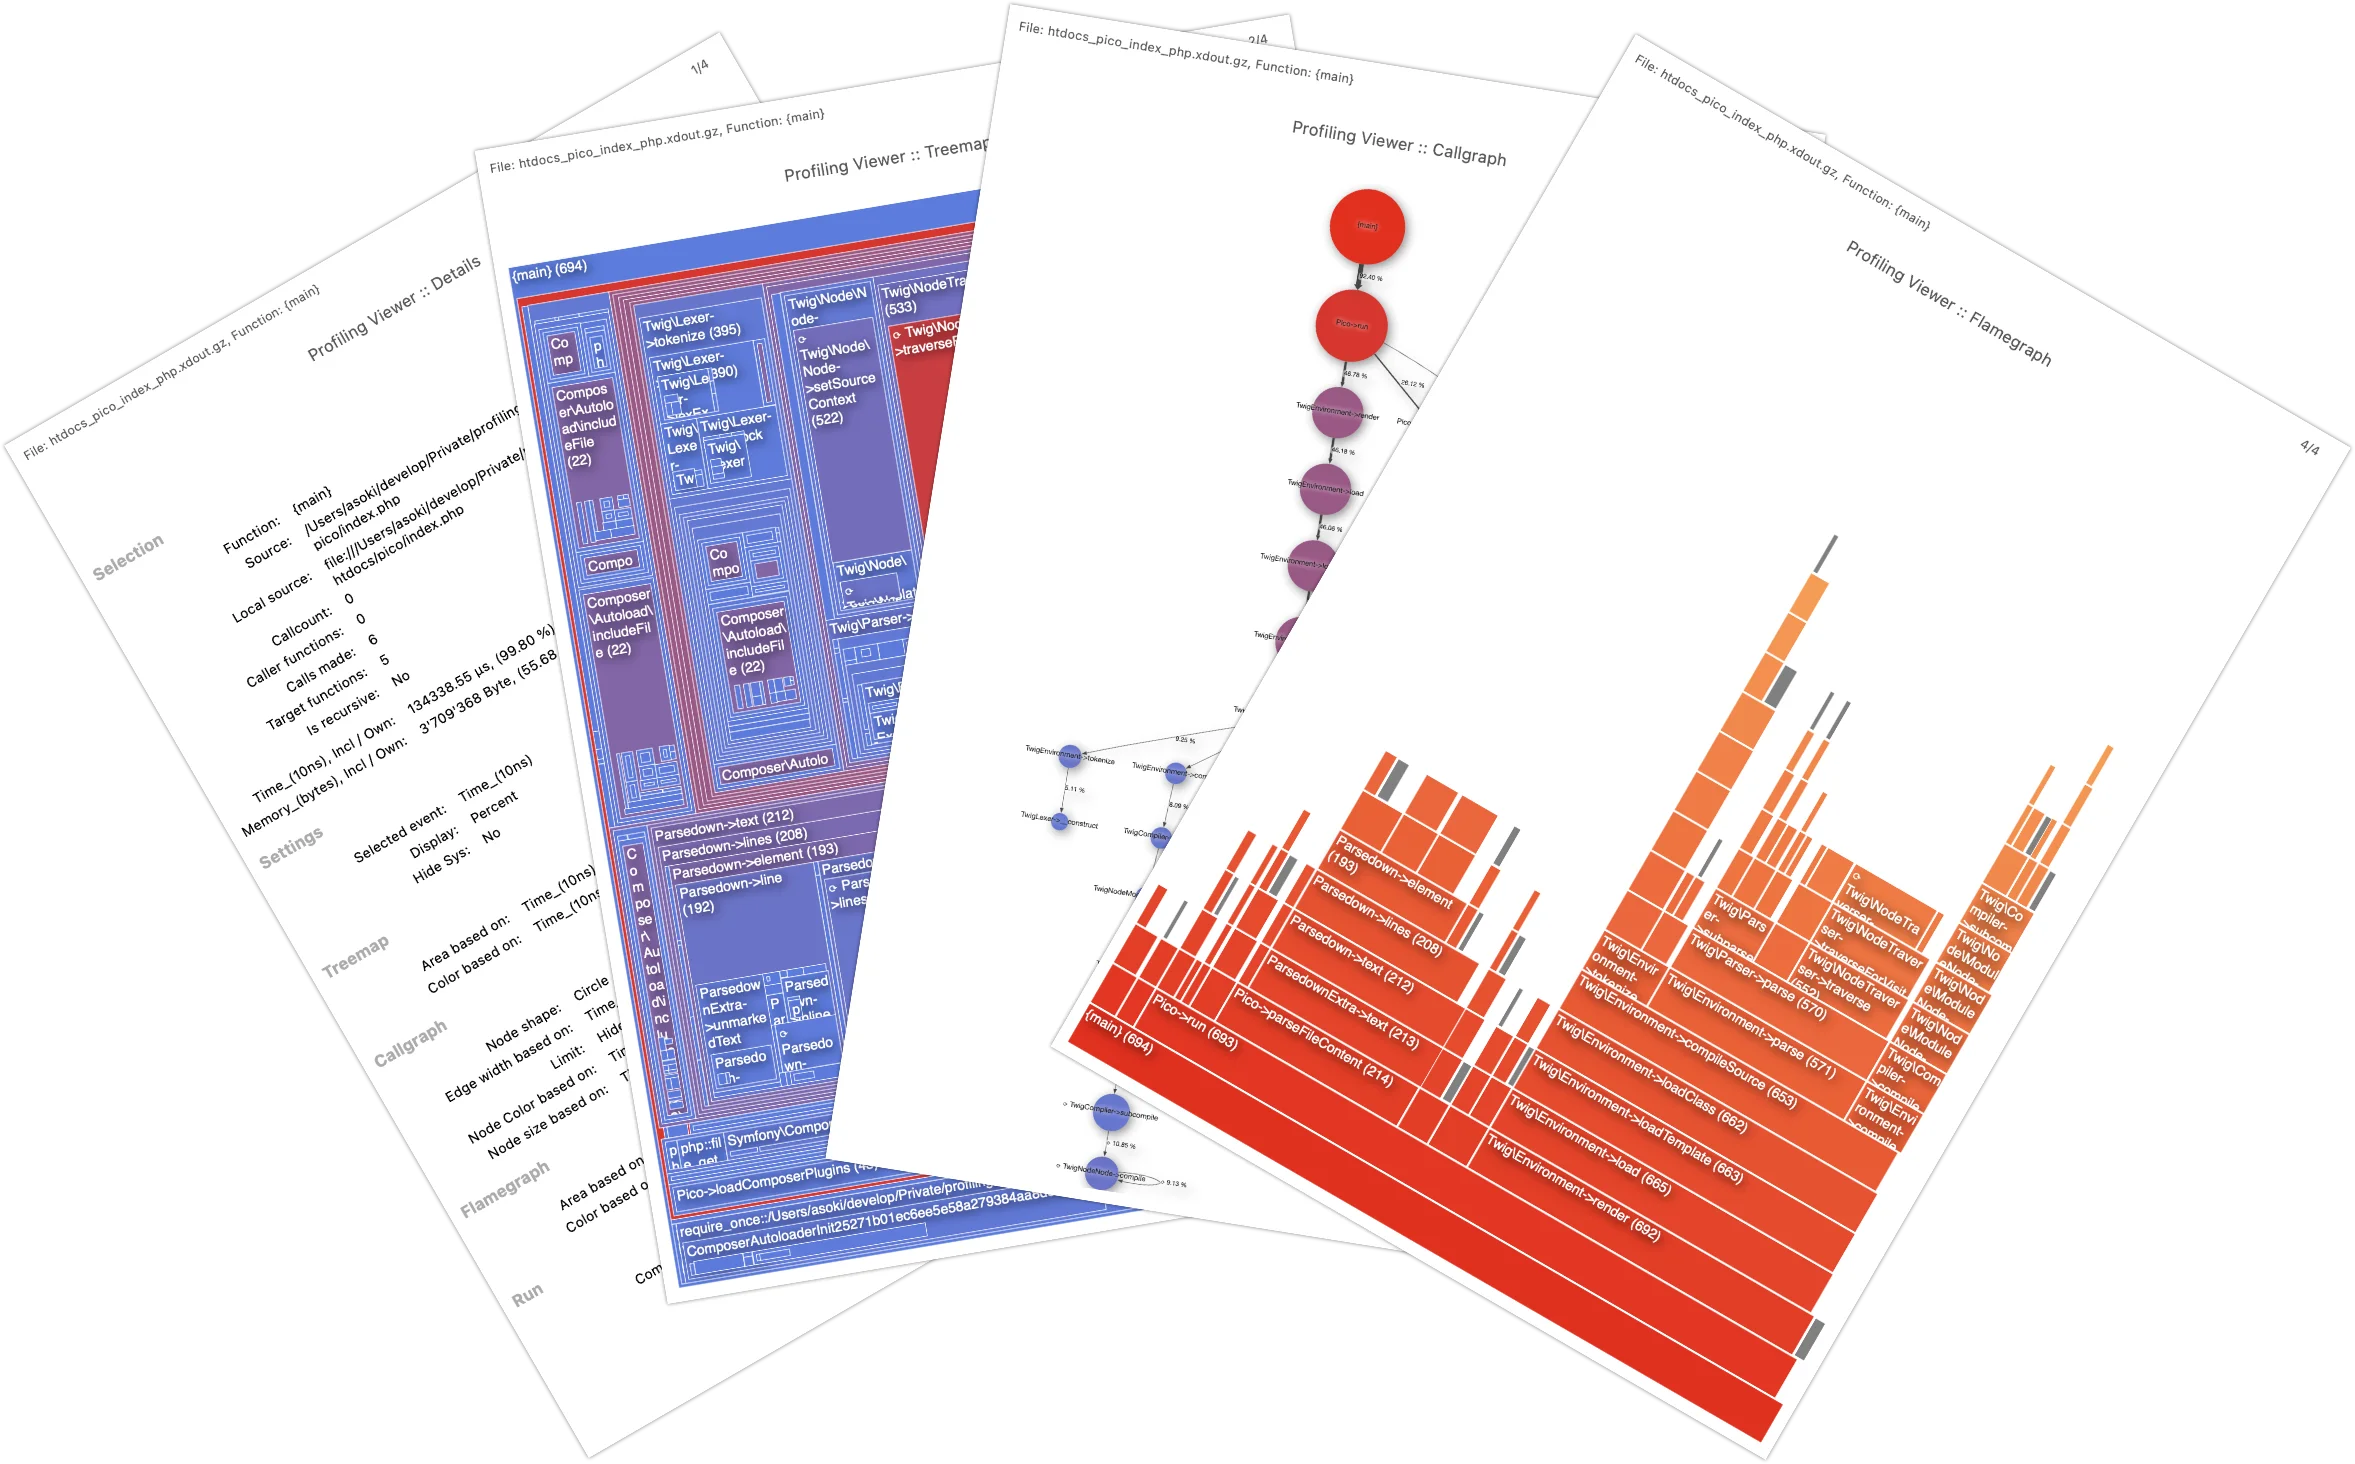 4 printed pages, Details, Treemap, Callgraph, Flamegraph